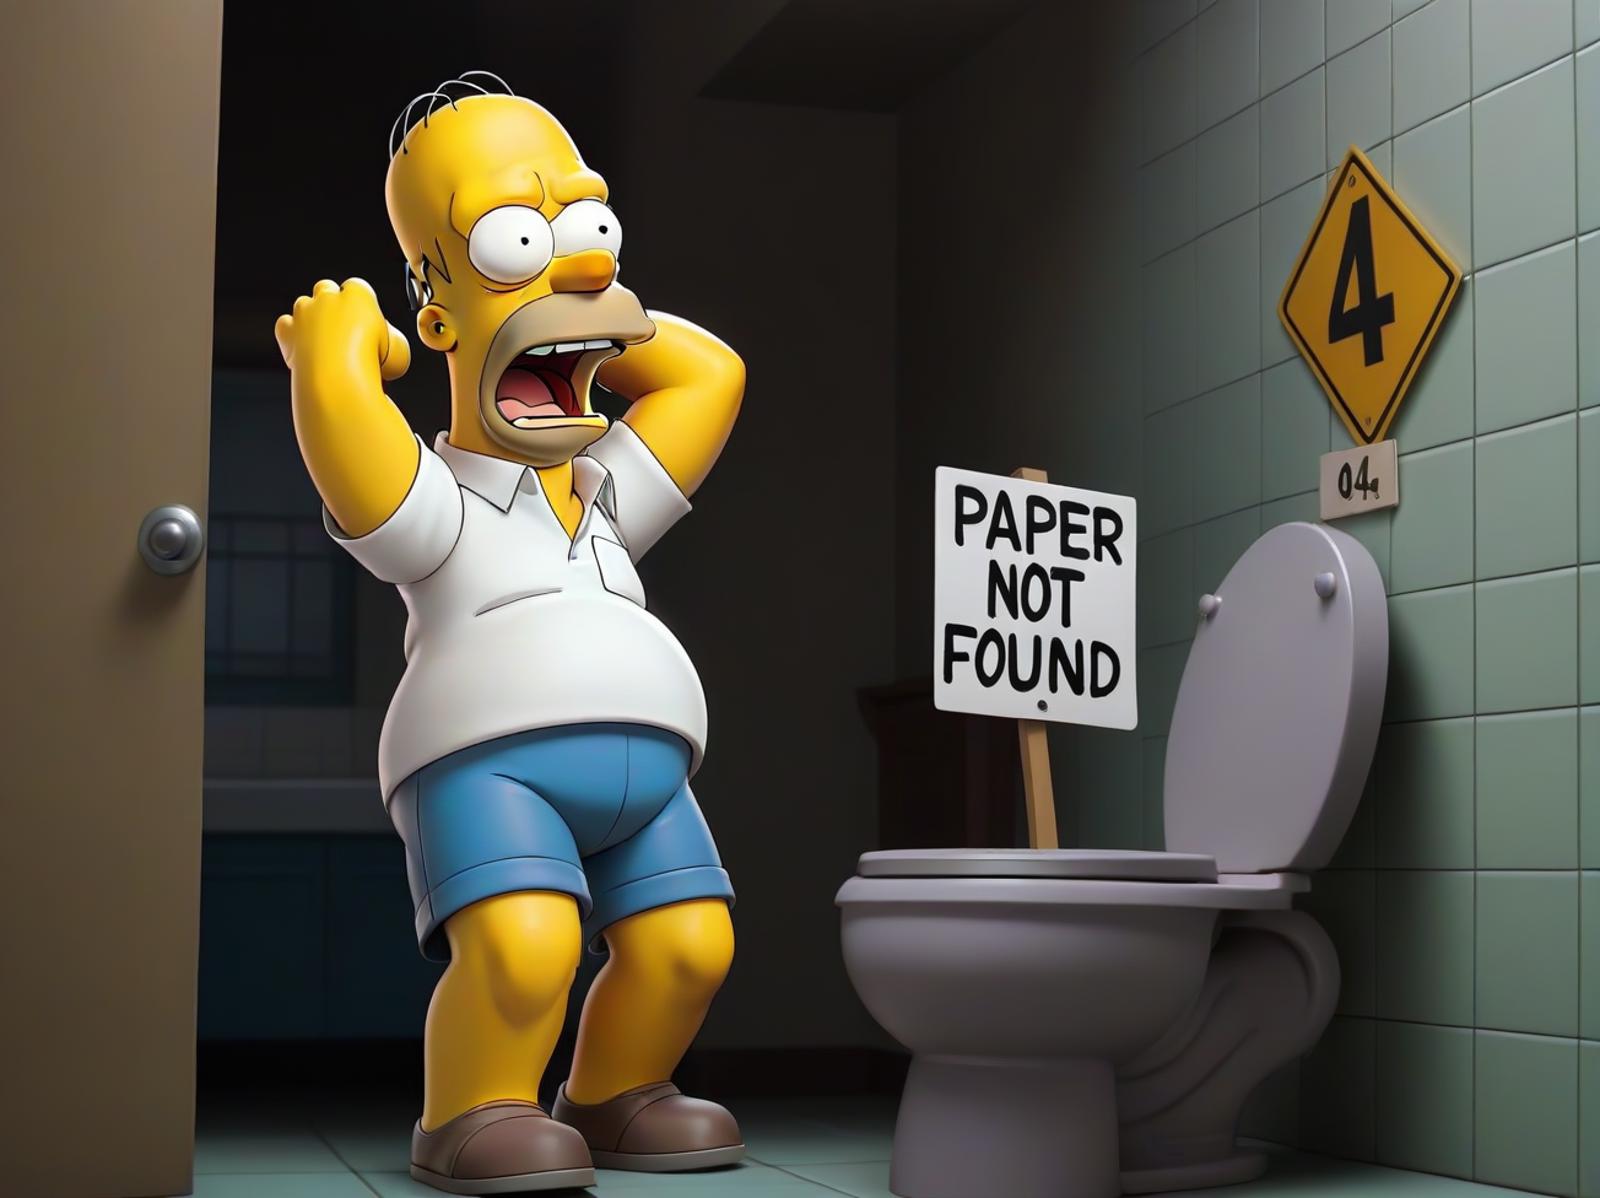 A cartoon character standing in front of a toilet with a "Paper Not Found" sign.